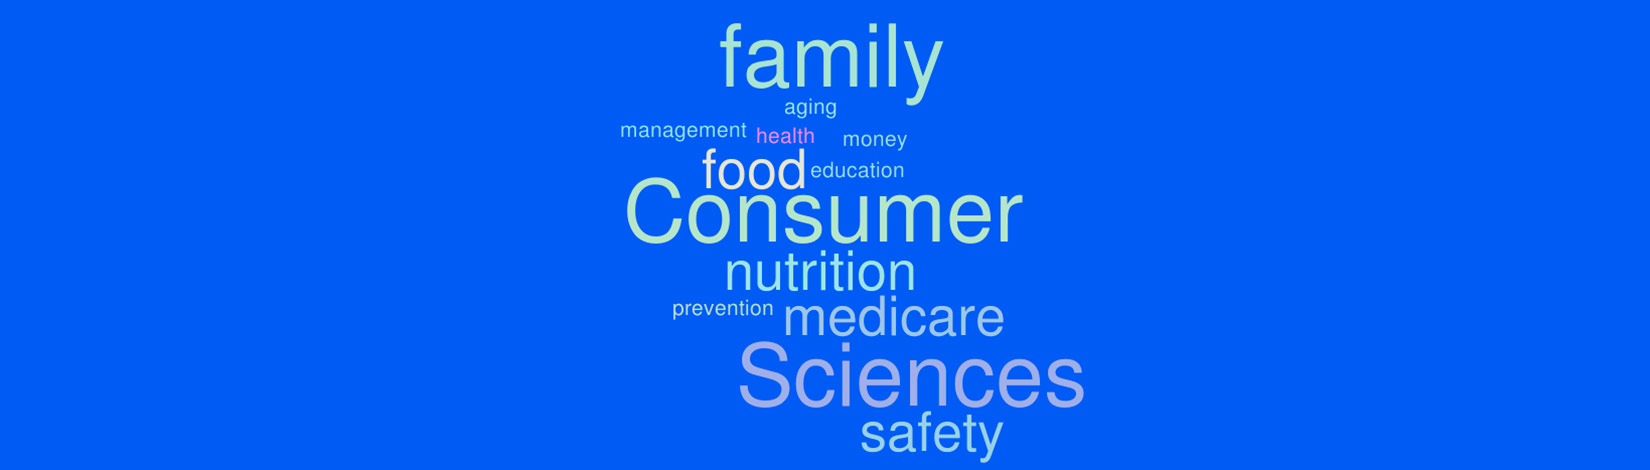 Word cloud banner for Family & Consumer Science, family, aging, management, health, money, food, education, consumer, nutrition, prevention, medicare, sciences, safety